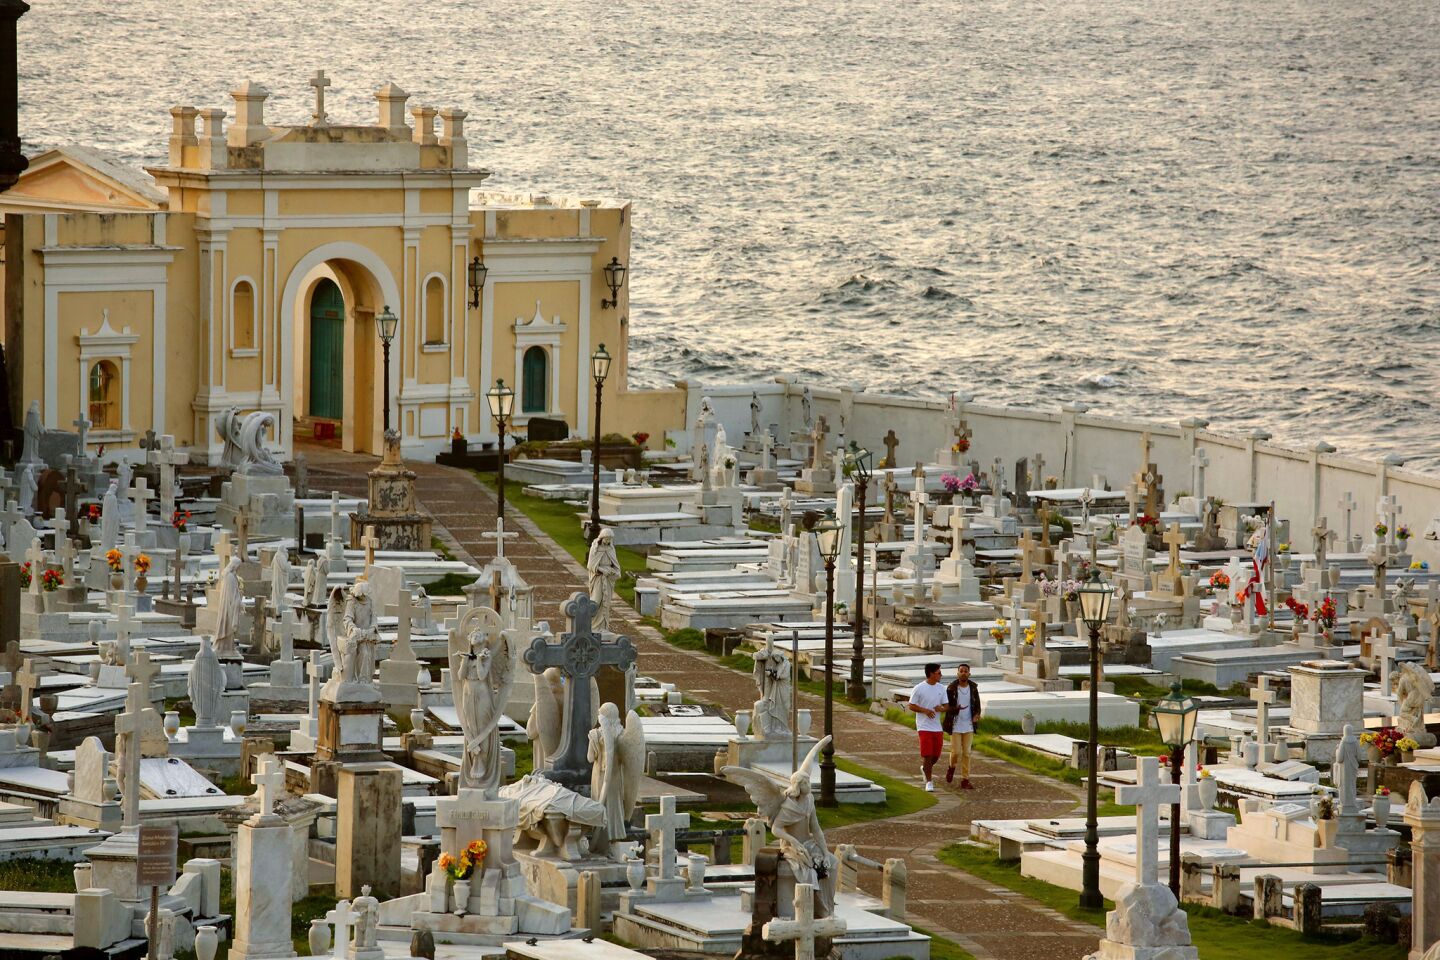 A historic cemetery at the water's edge in Old San Juan, Puerto Rico, faces possible flooding as Hurricane Maria passes over the island.